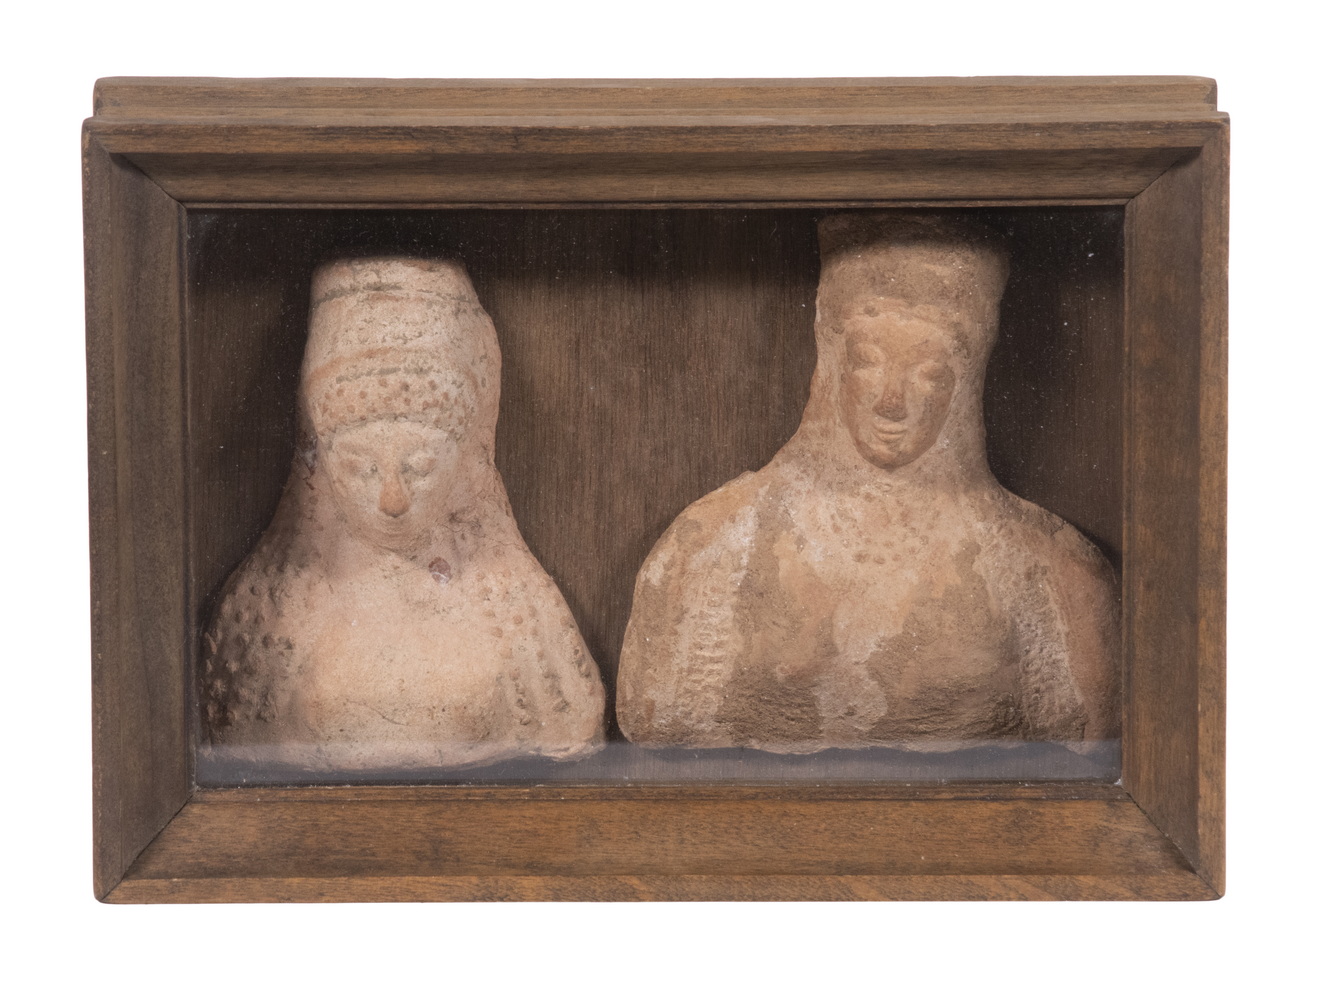 (2) ETRUSCAN CLAY BUSTS OF WOMEN